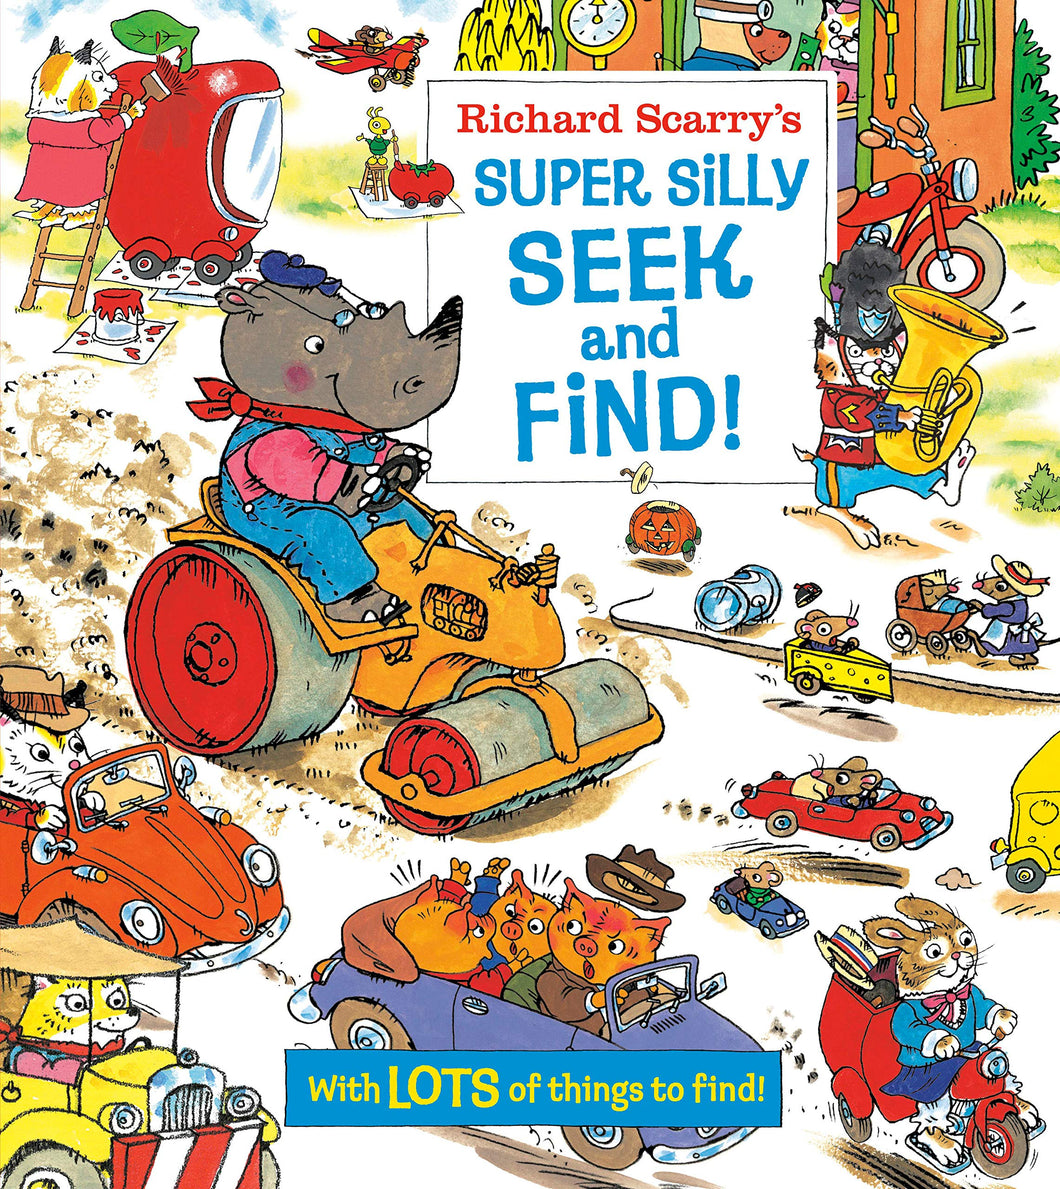 Richard Scarry's Super Silly Seek and Find Board Book [Richard Scarry]